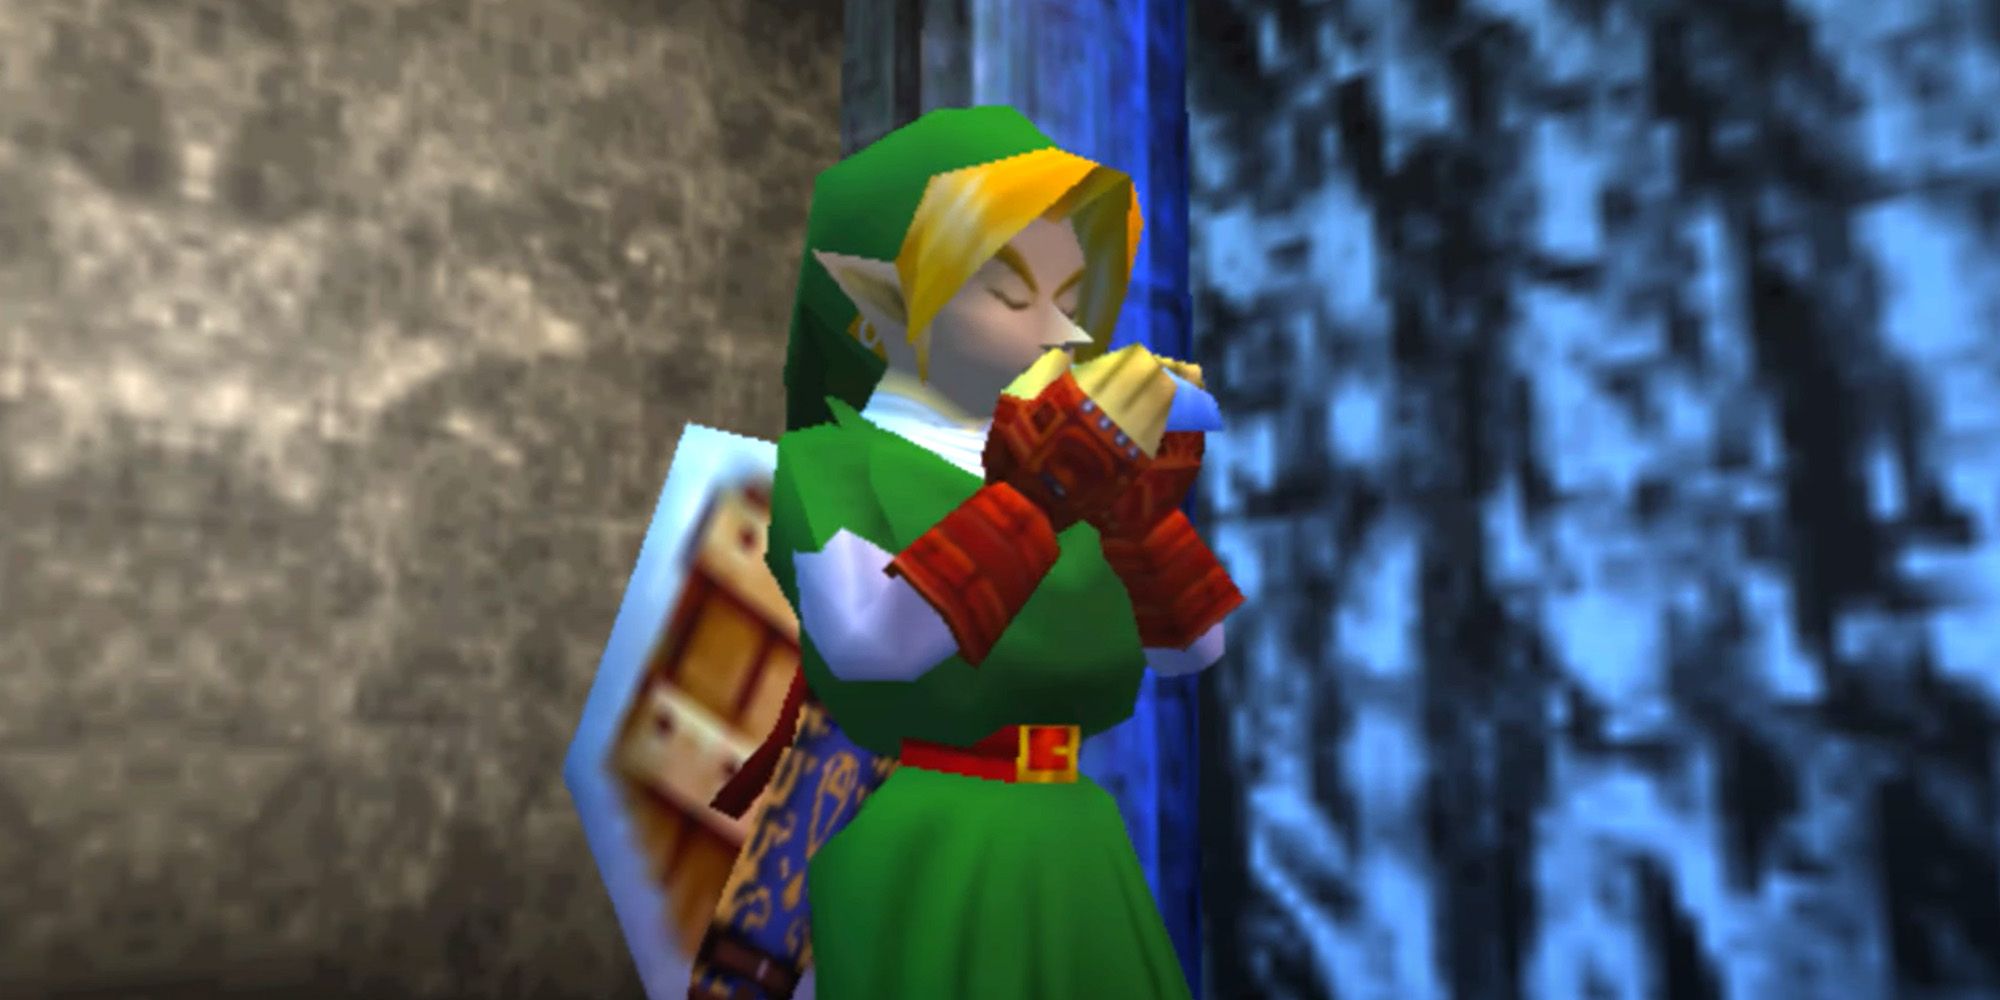 Link playing the Song of Time in The Legend of Zelda: Ocarina of Time